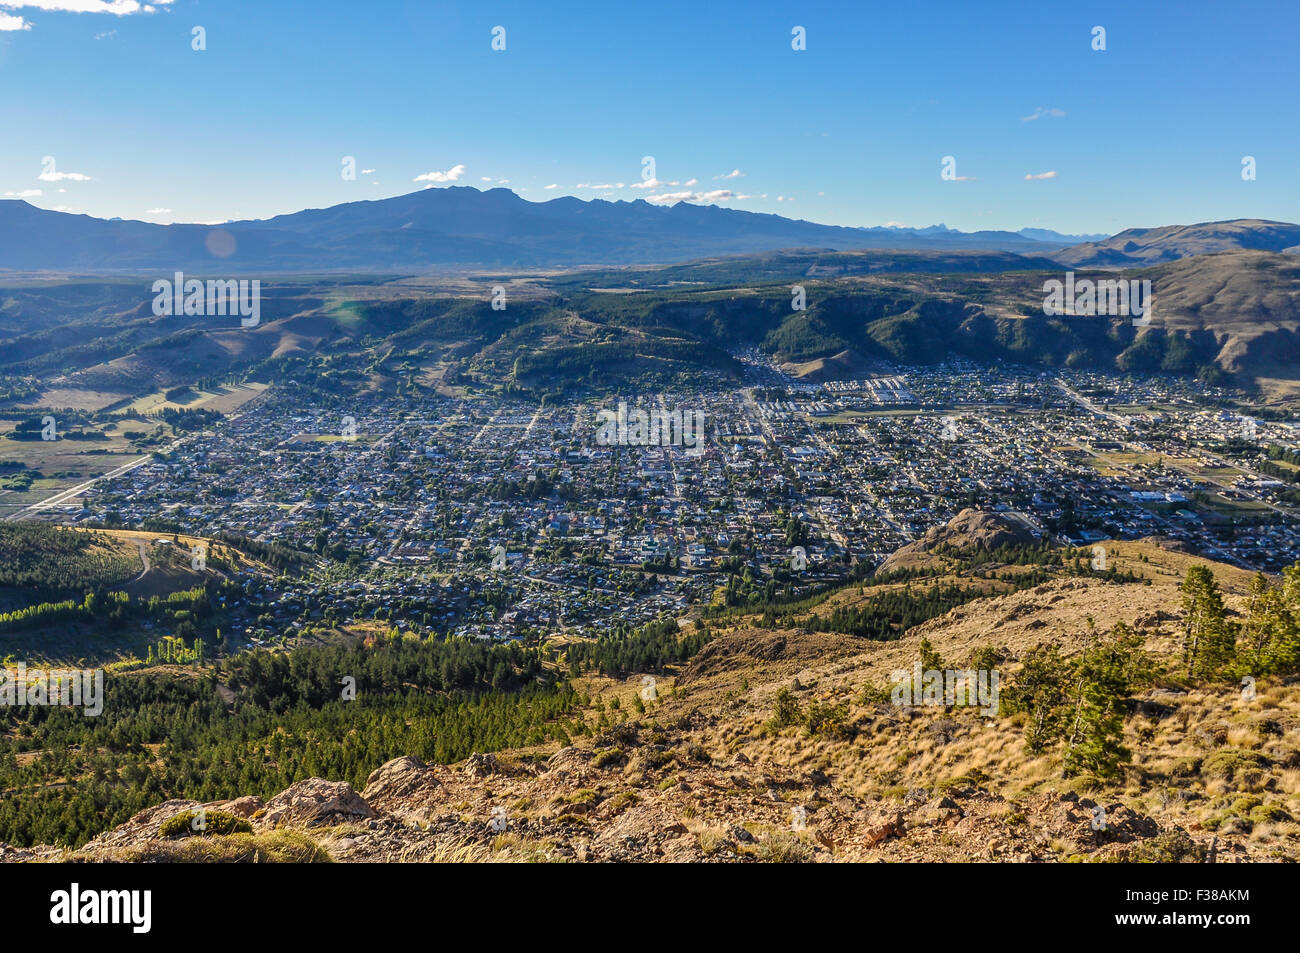 View from the top of the mountain, Esquel, Patagonia, Argentina Stock Photo